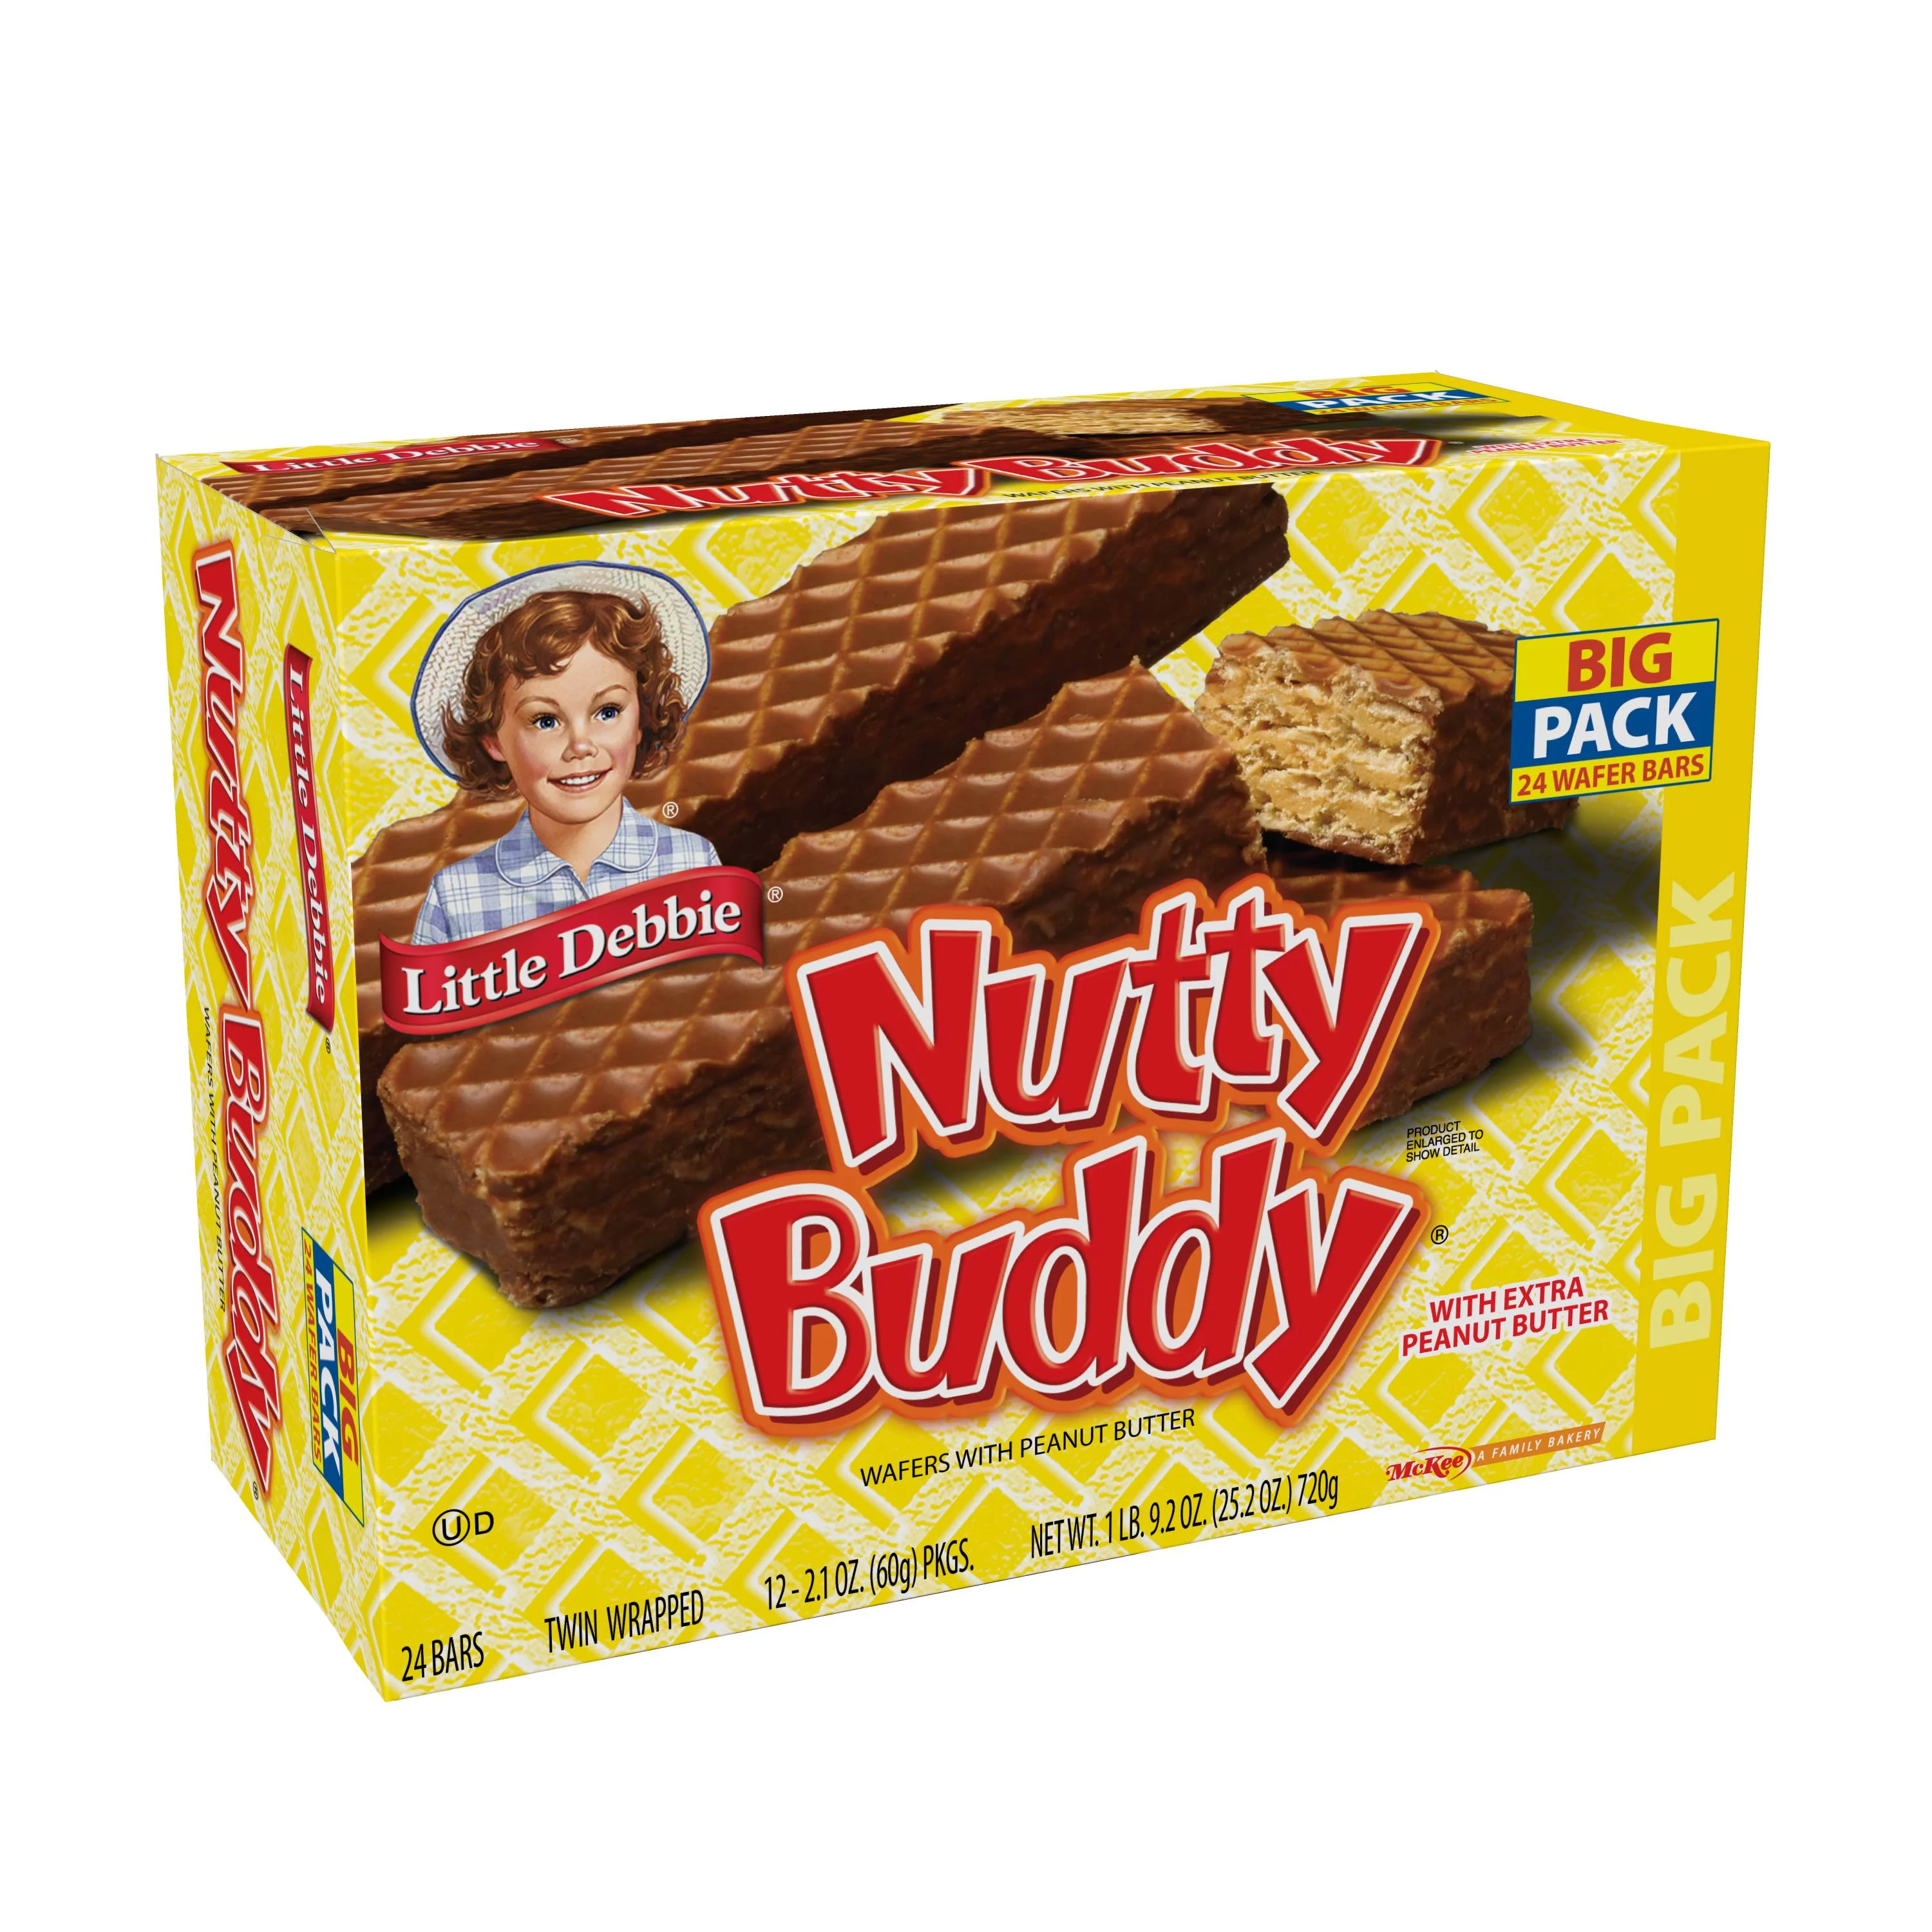 Little Debbie Big Pack Nutty Buddy Wafer Bars, 12 Wraps, 24 Cookies Per Pack, 24.1 oz